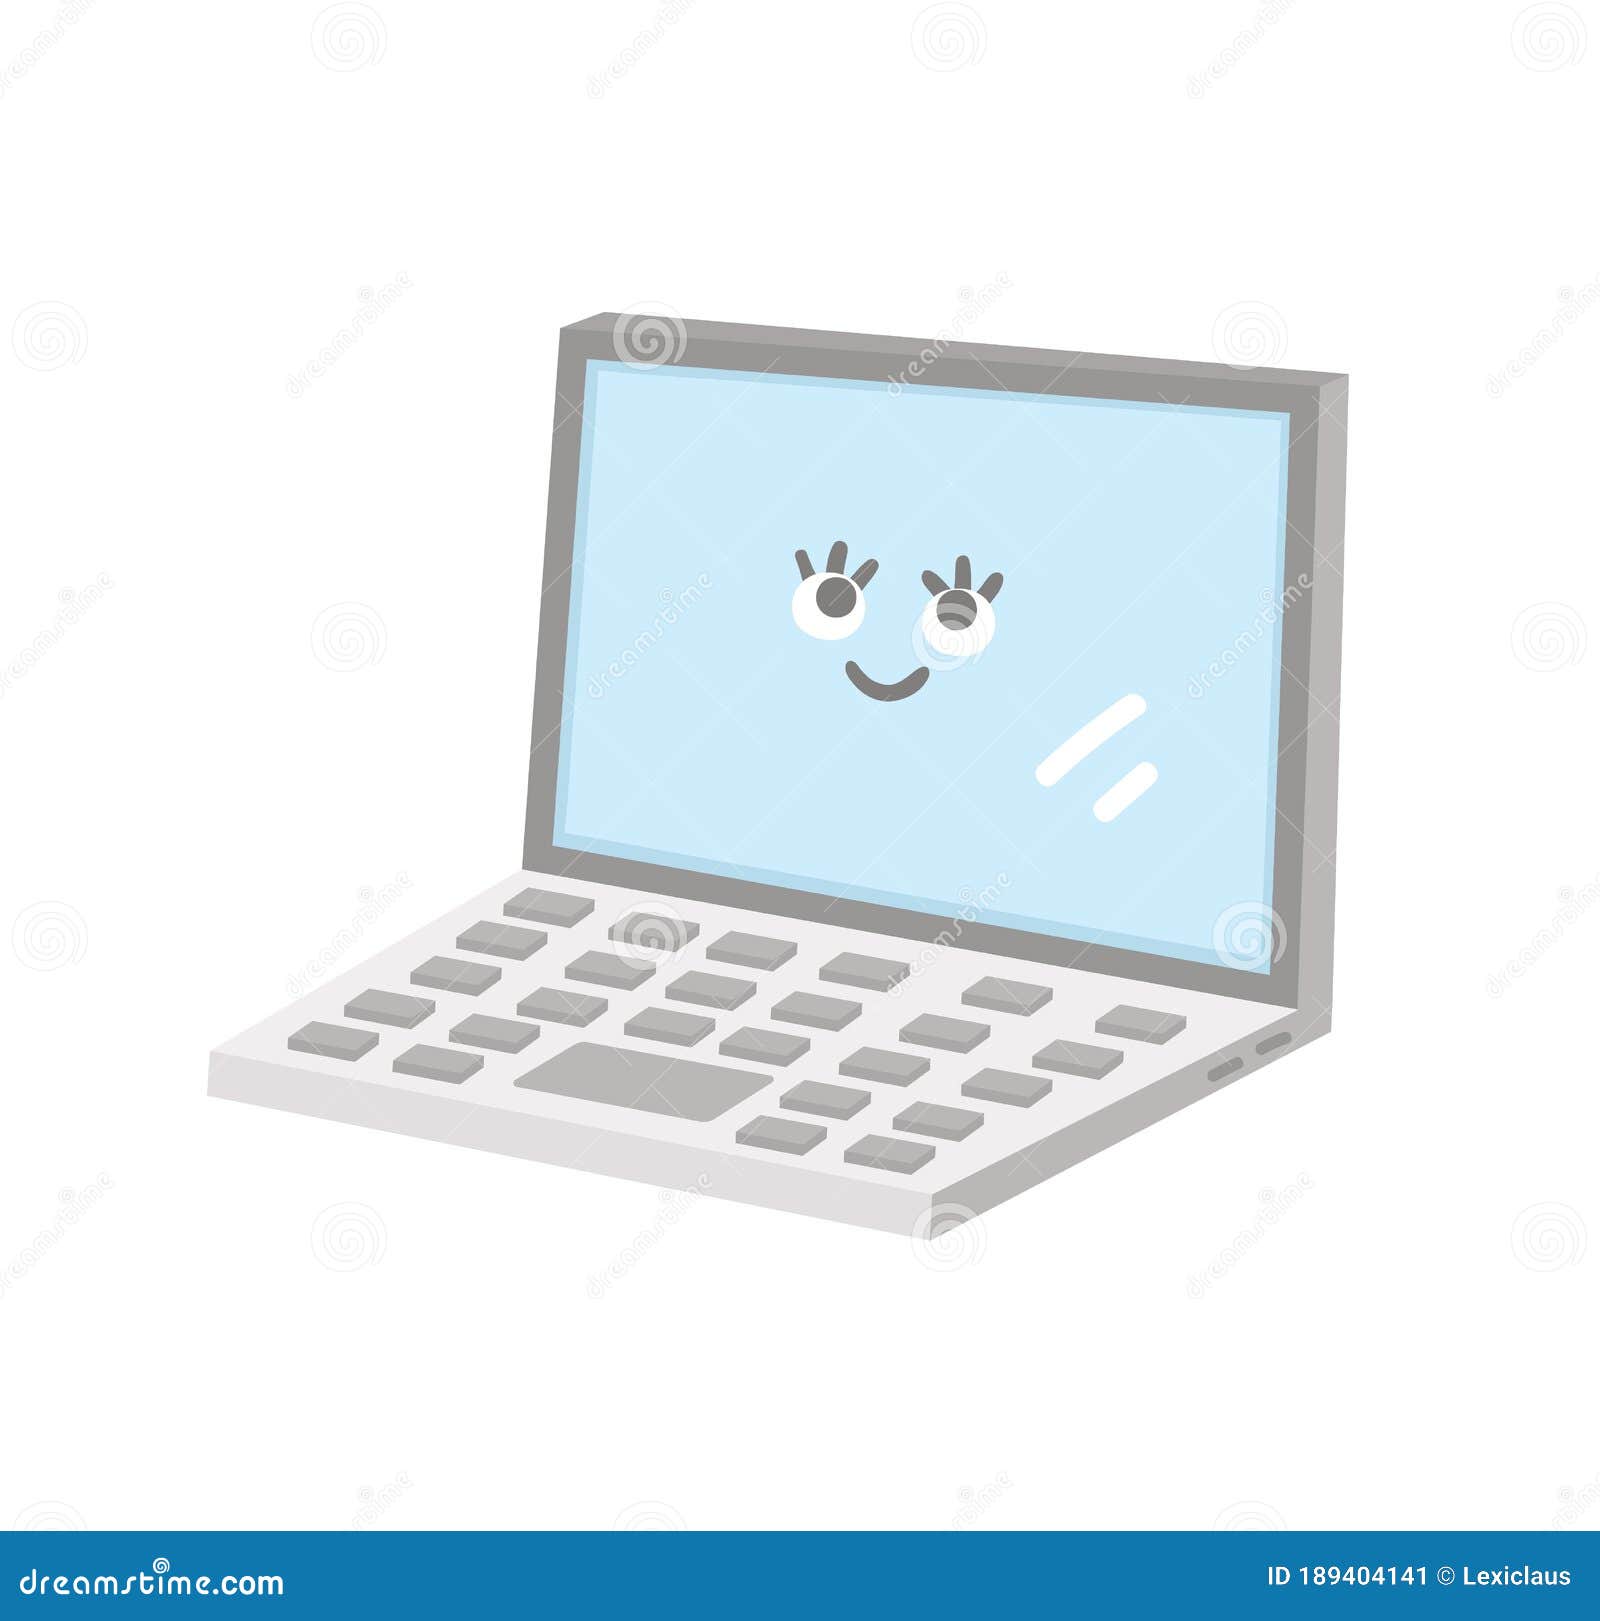 clipart of a computer